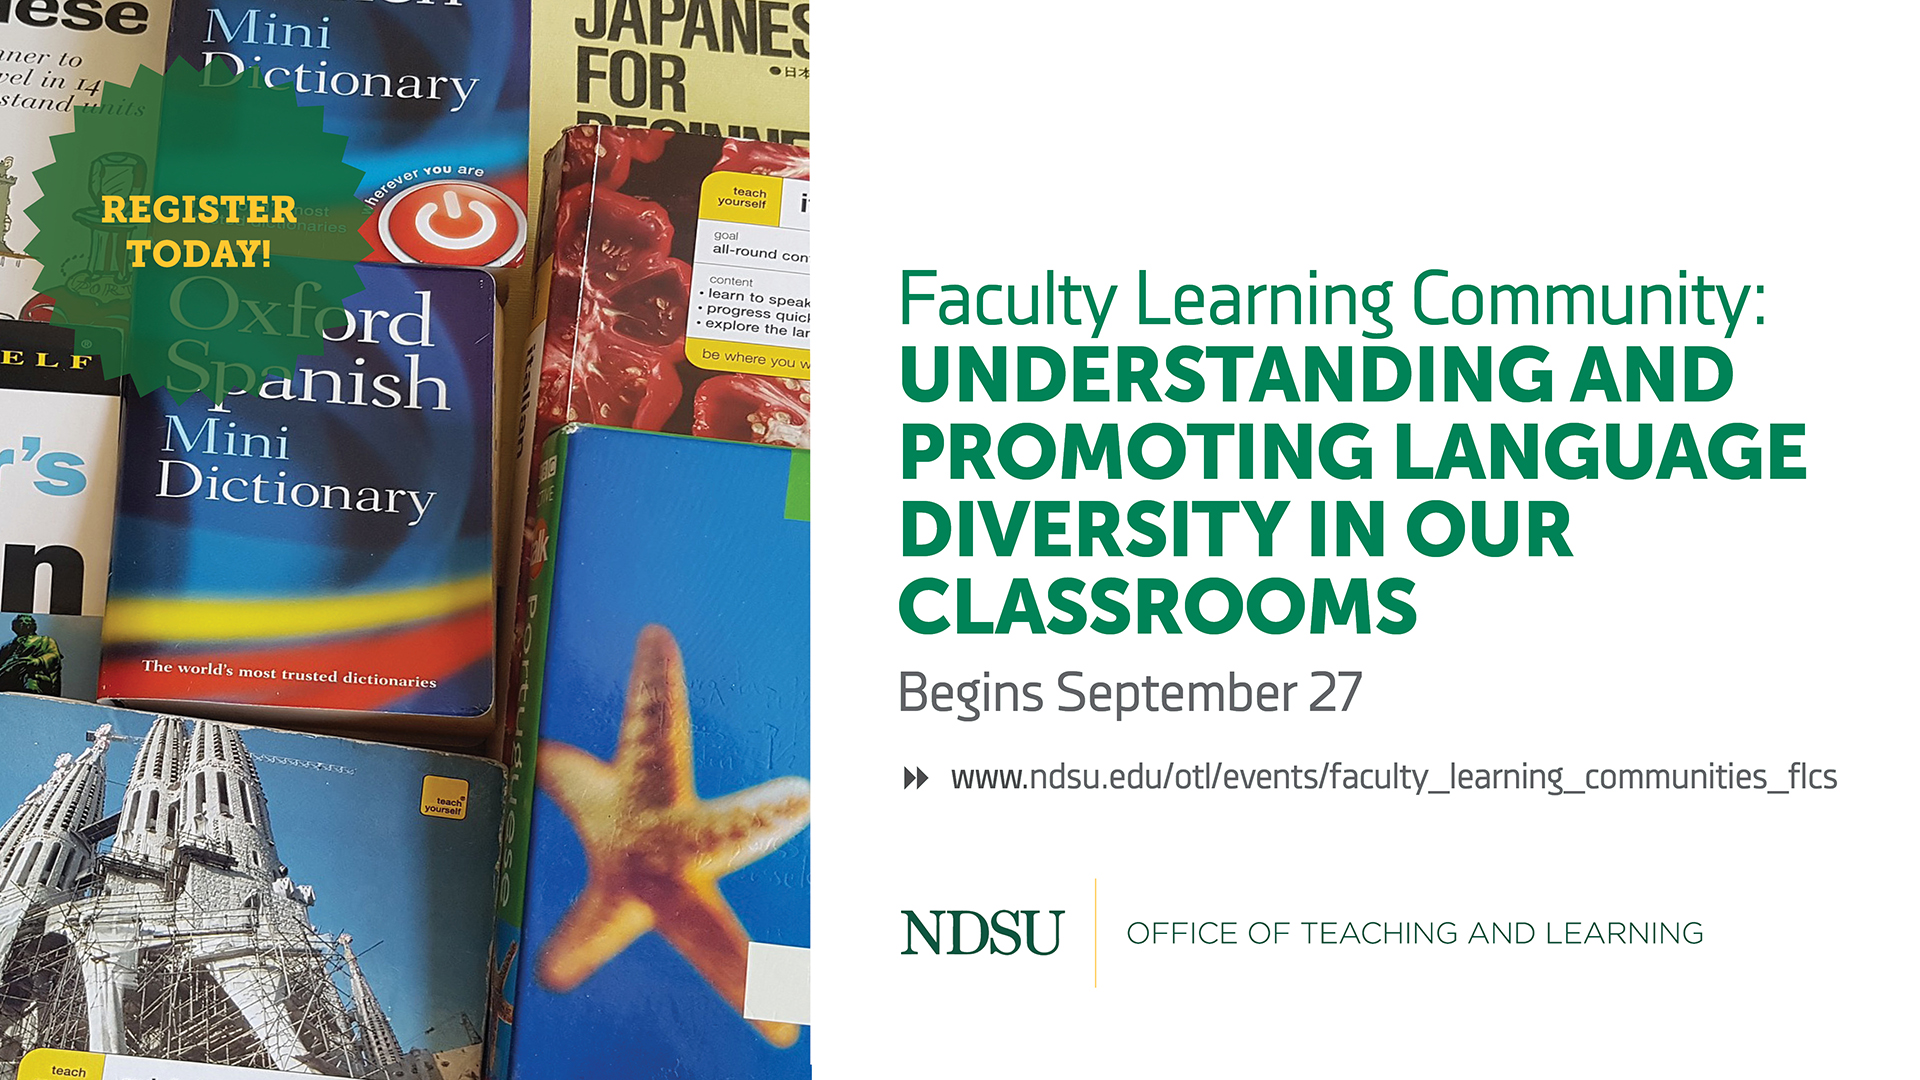 Faculty Learning Community: Understanding and Promoting Language Diversity in our Classrooms